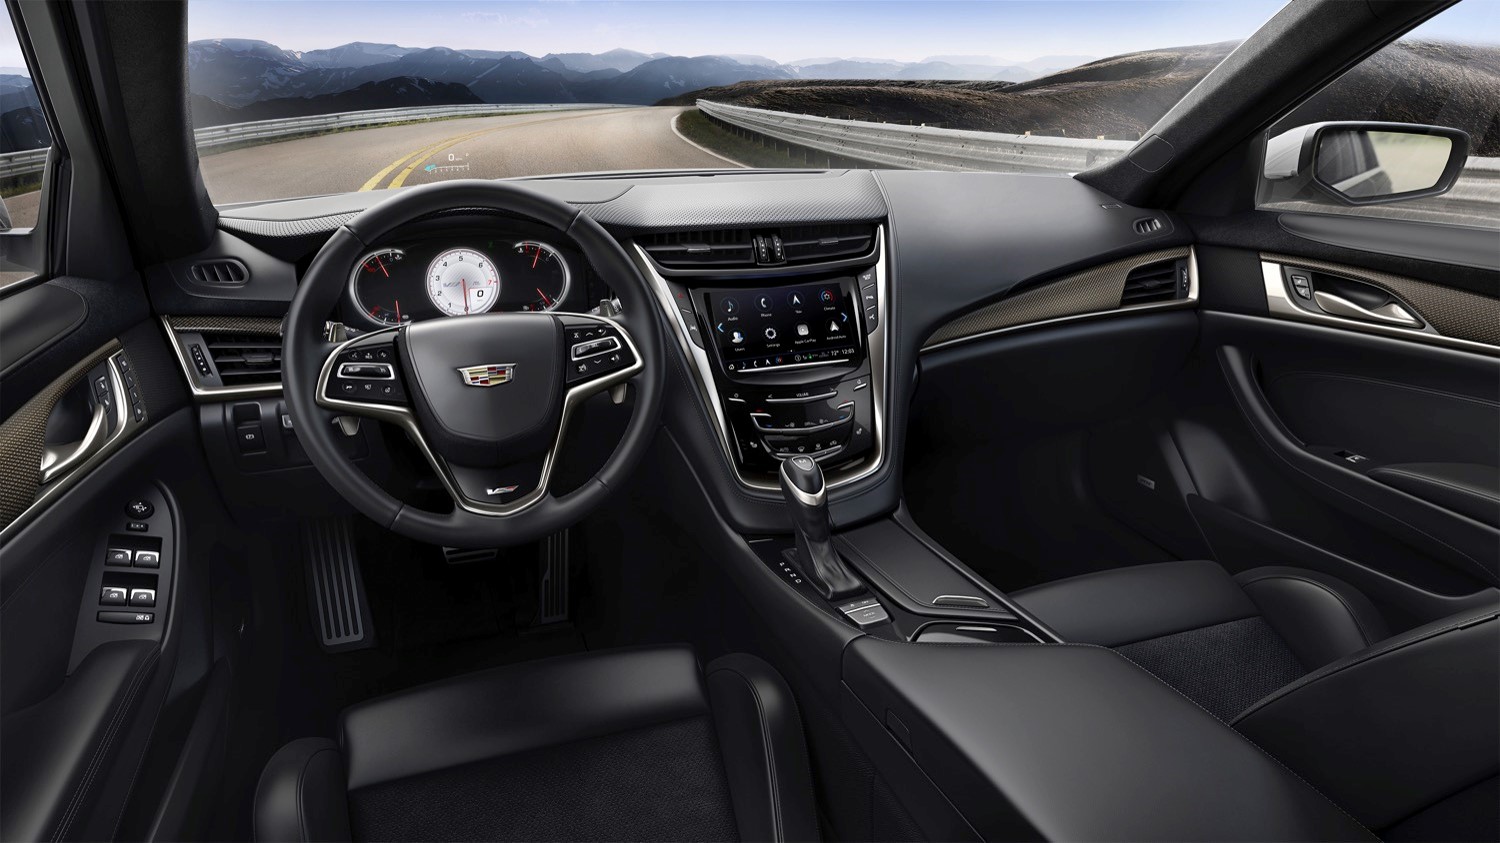 Cadillac Addresses Its Achilles Heel and Finally Updates The User Interface